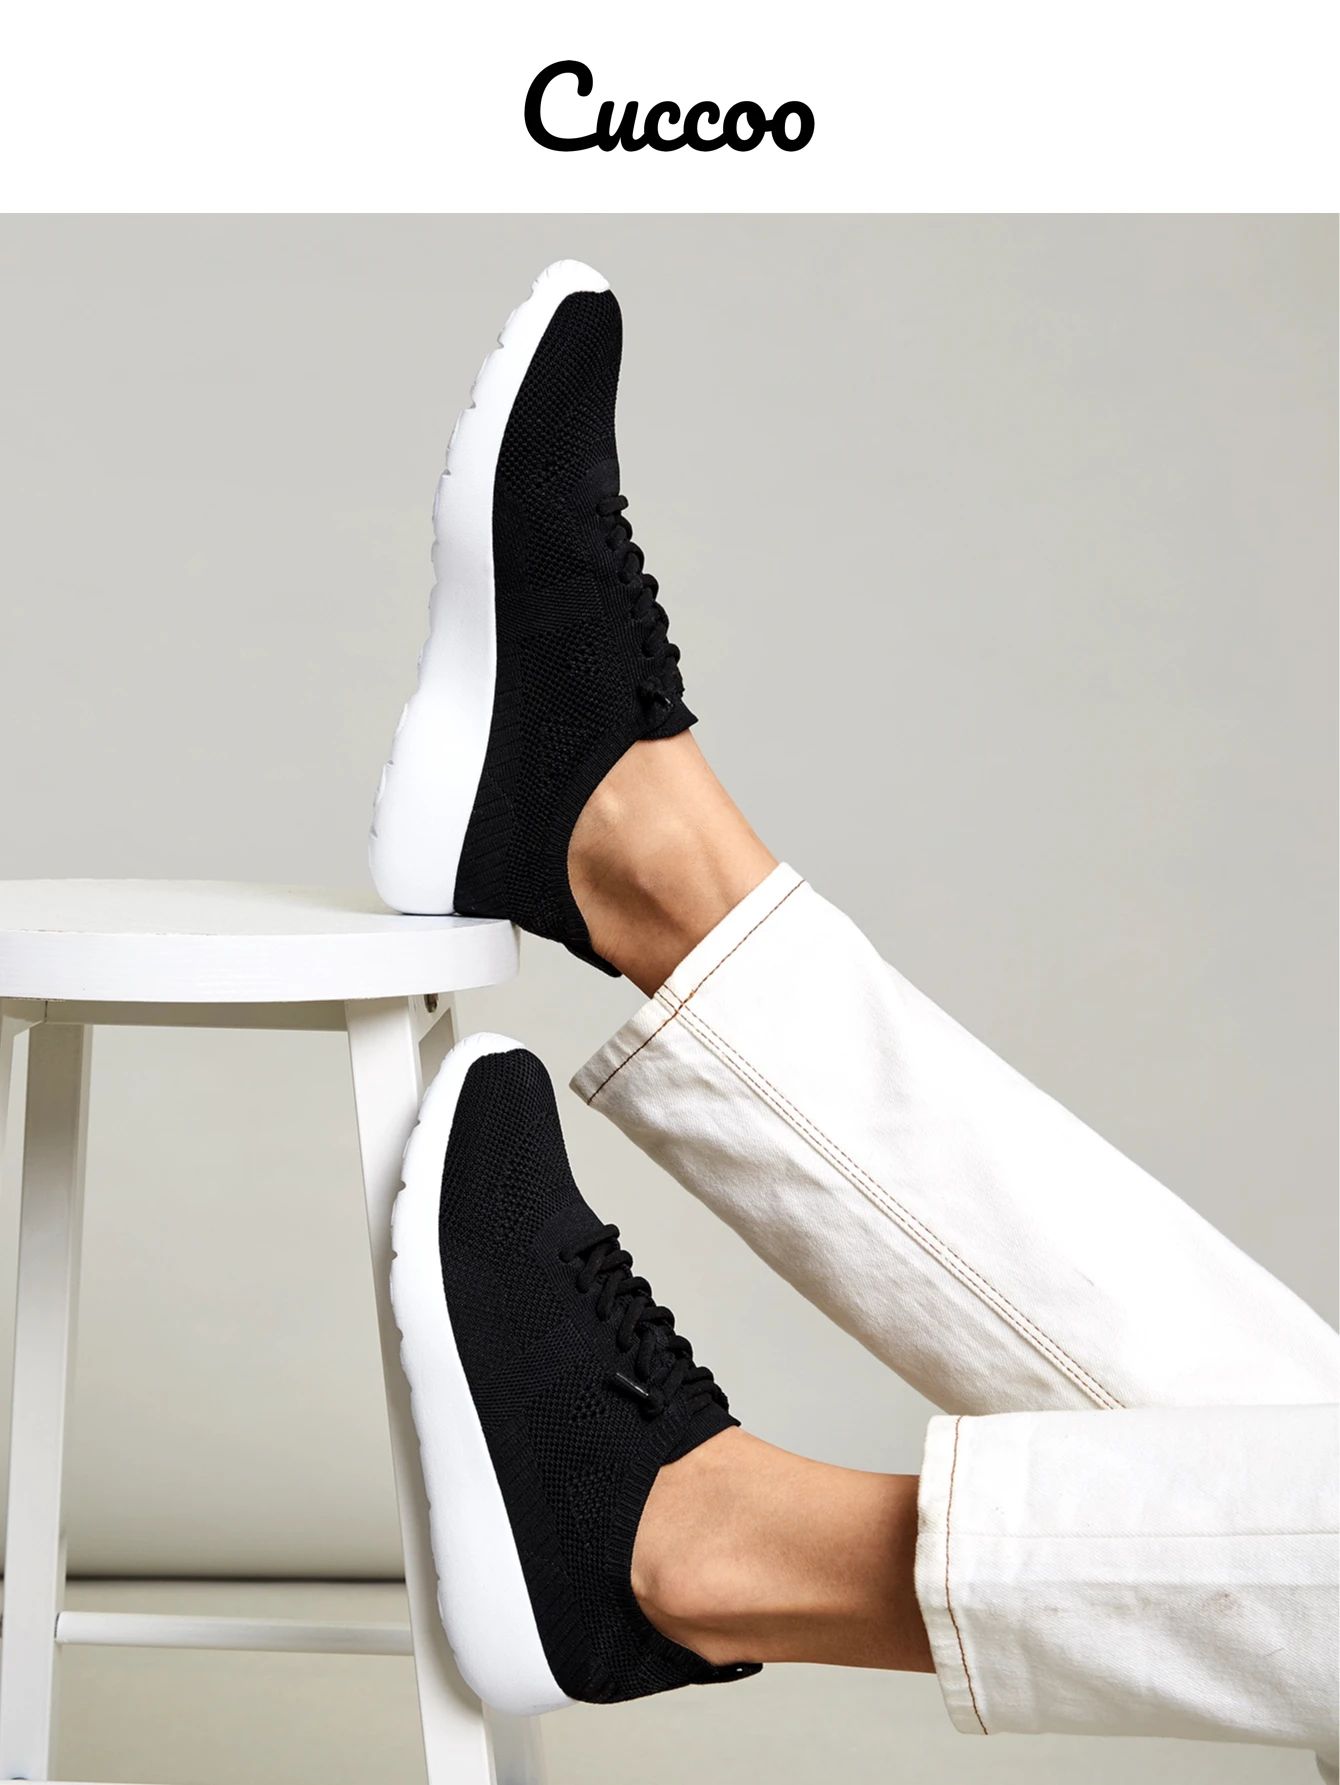 CUCCOO - The Everyday Sneakers | SHEIN